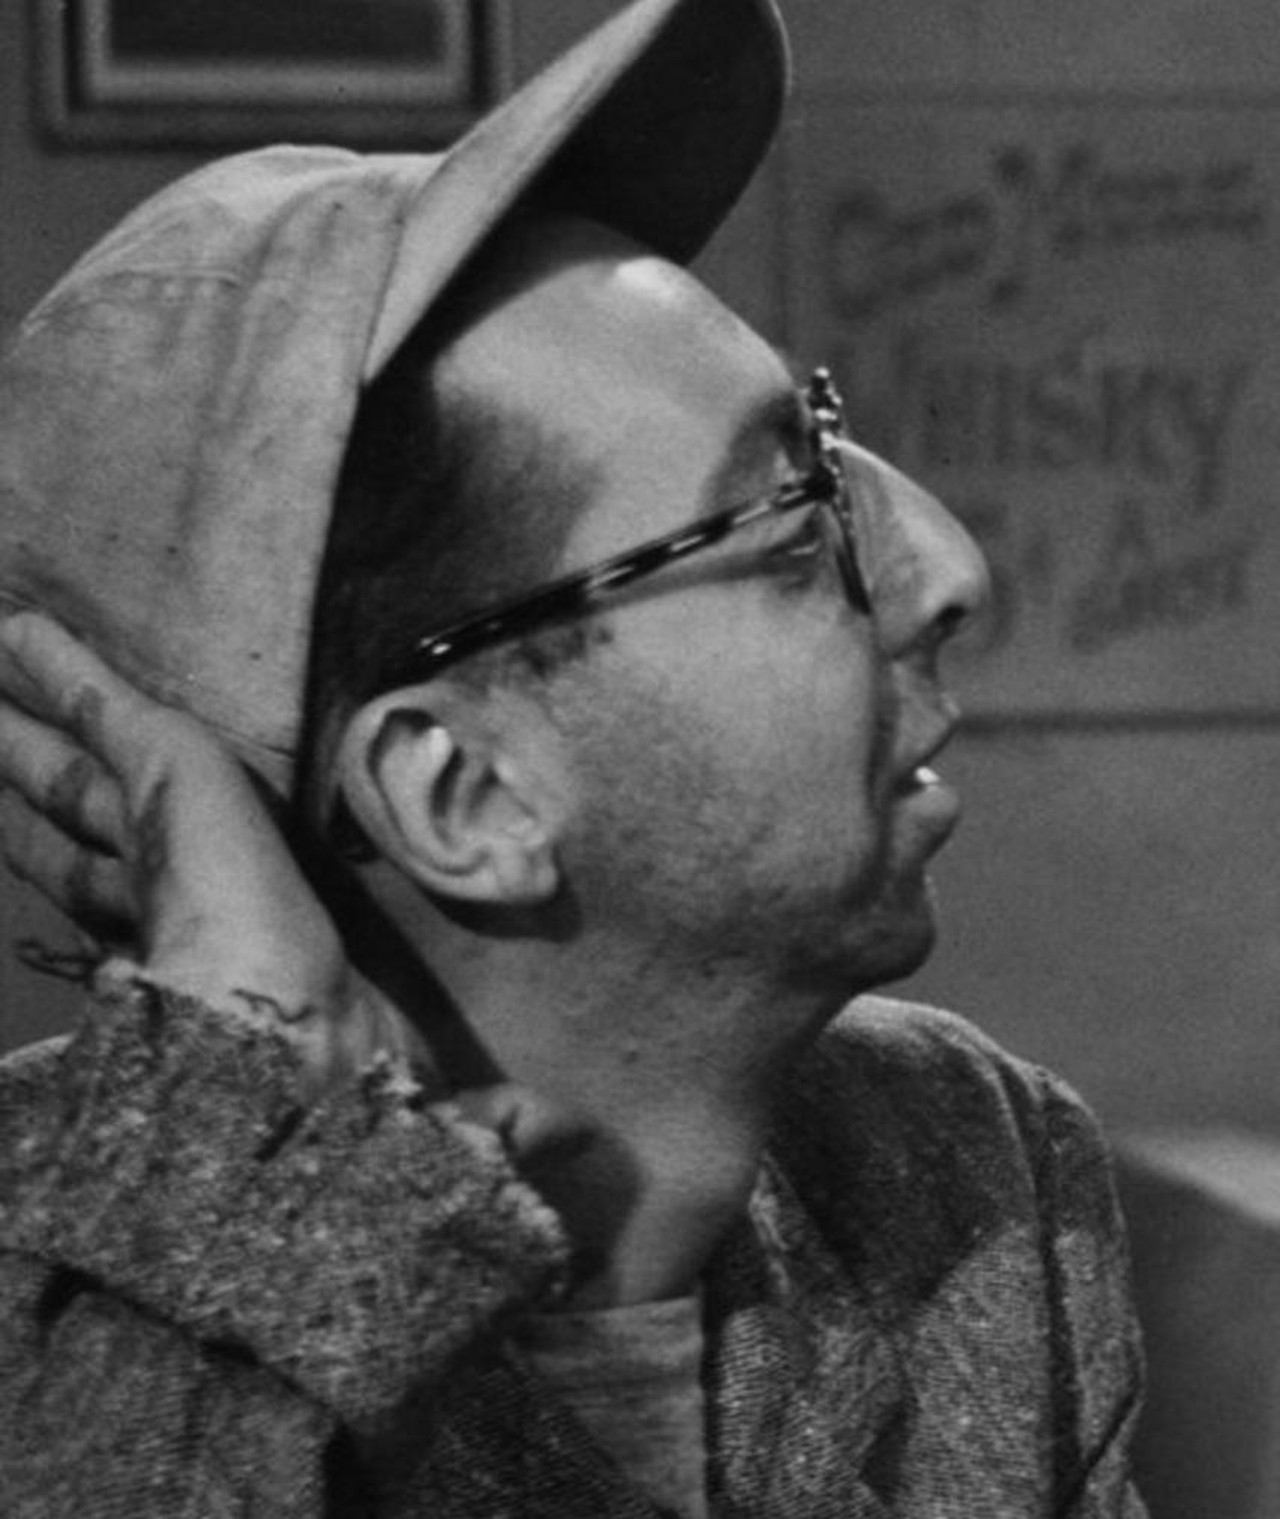 Photo of Arnold Stang